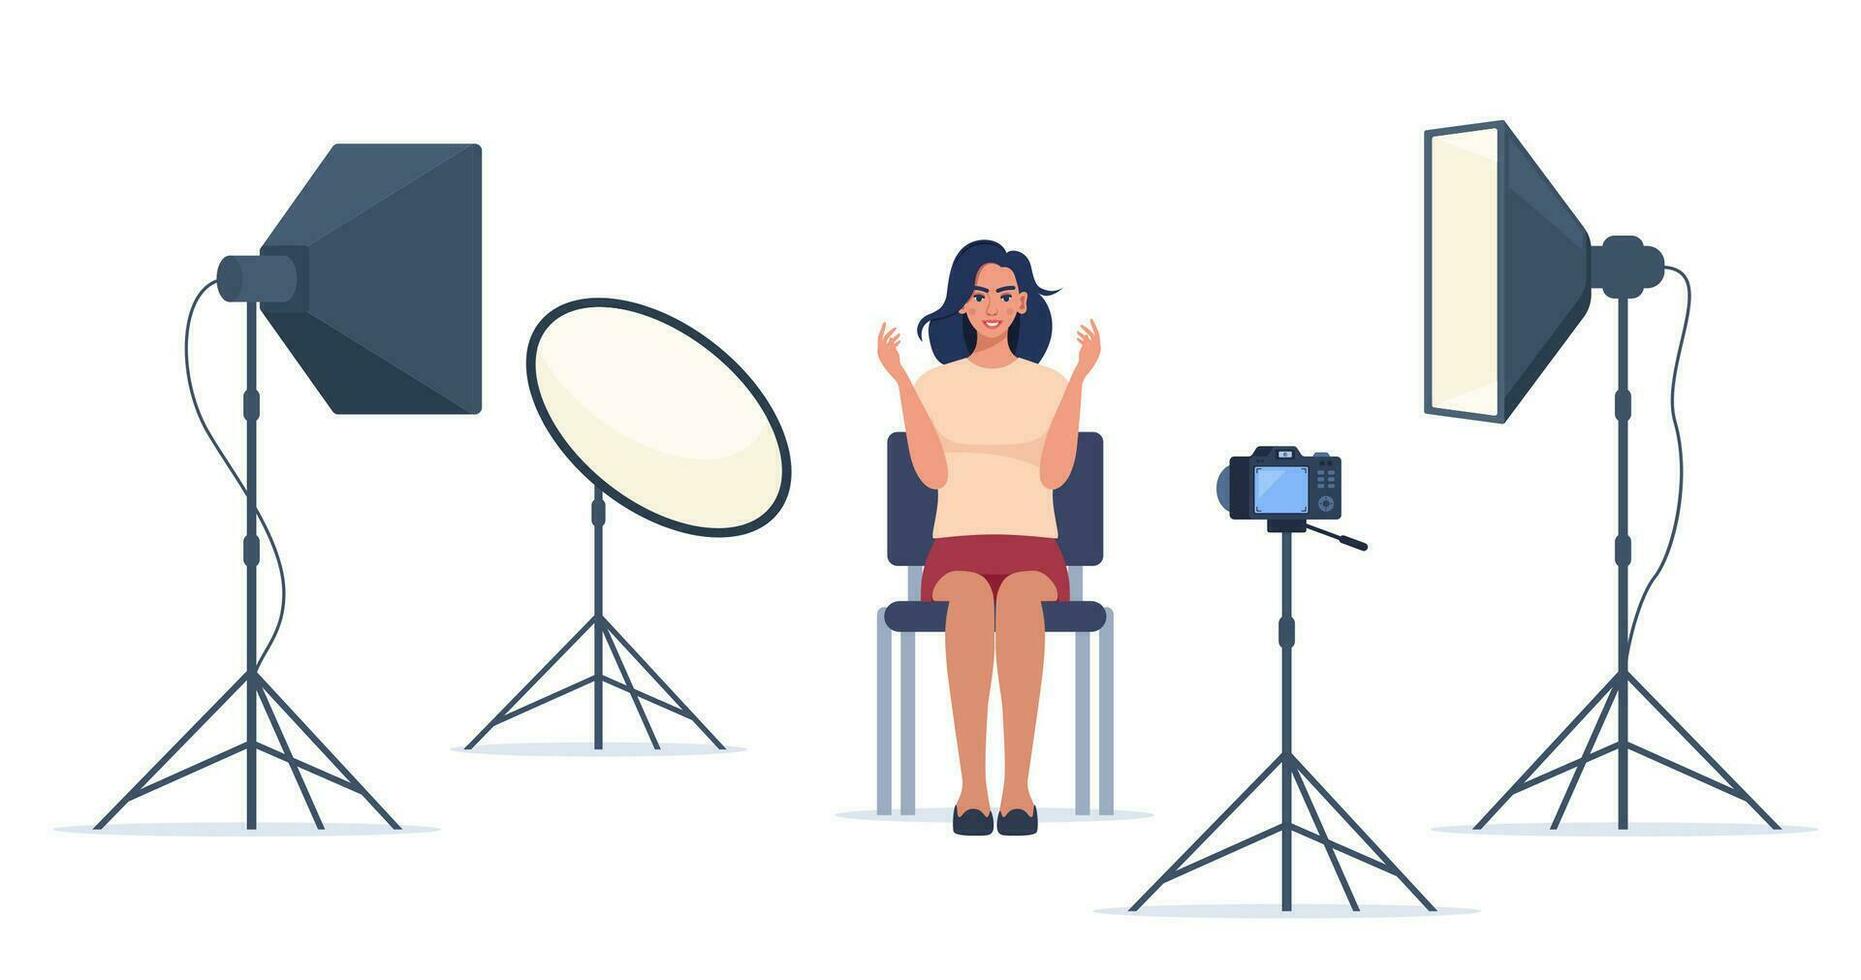 Shooting interview in professional studio. Soft box light, camera, spotlight. Professional equipment for video shooting. Woman having conversation on camera, making content. Vector illustration.